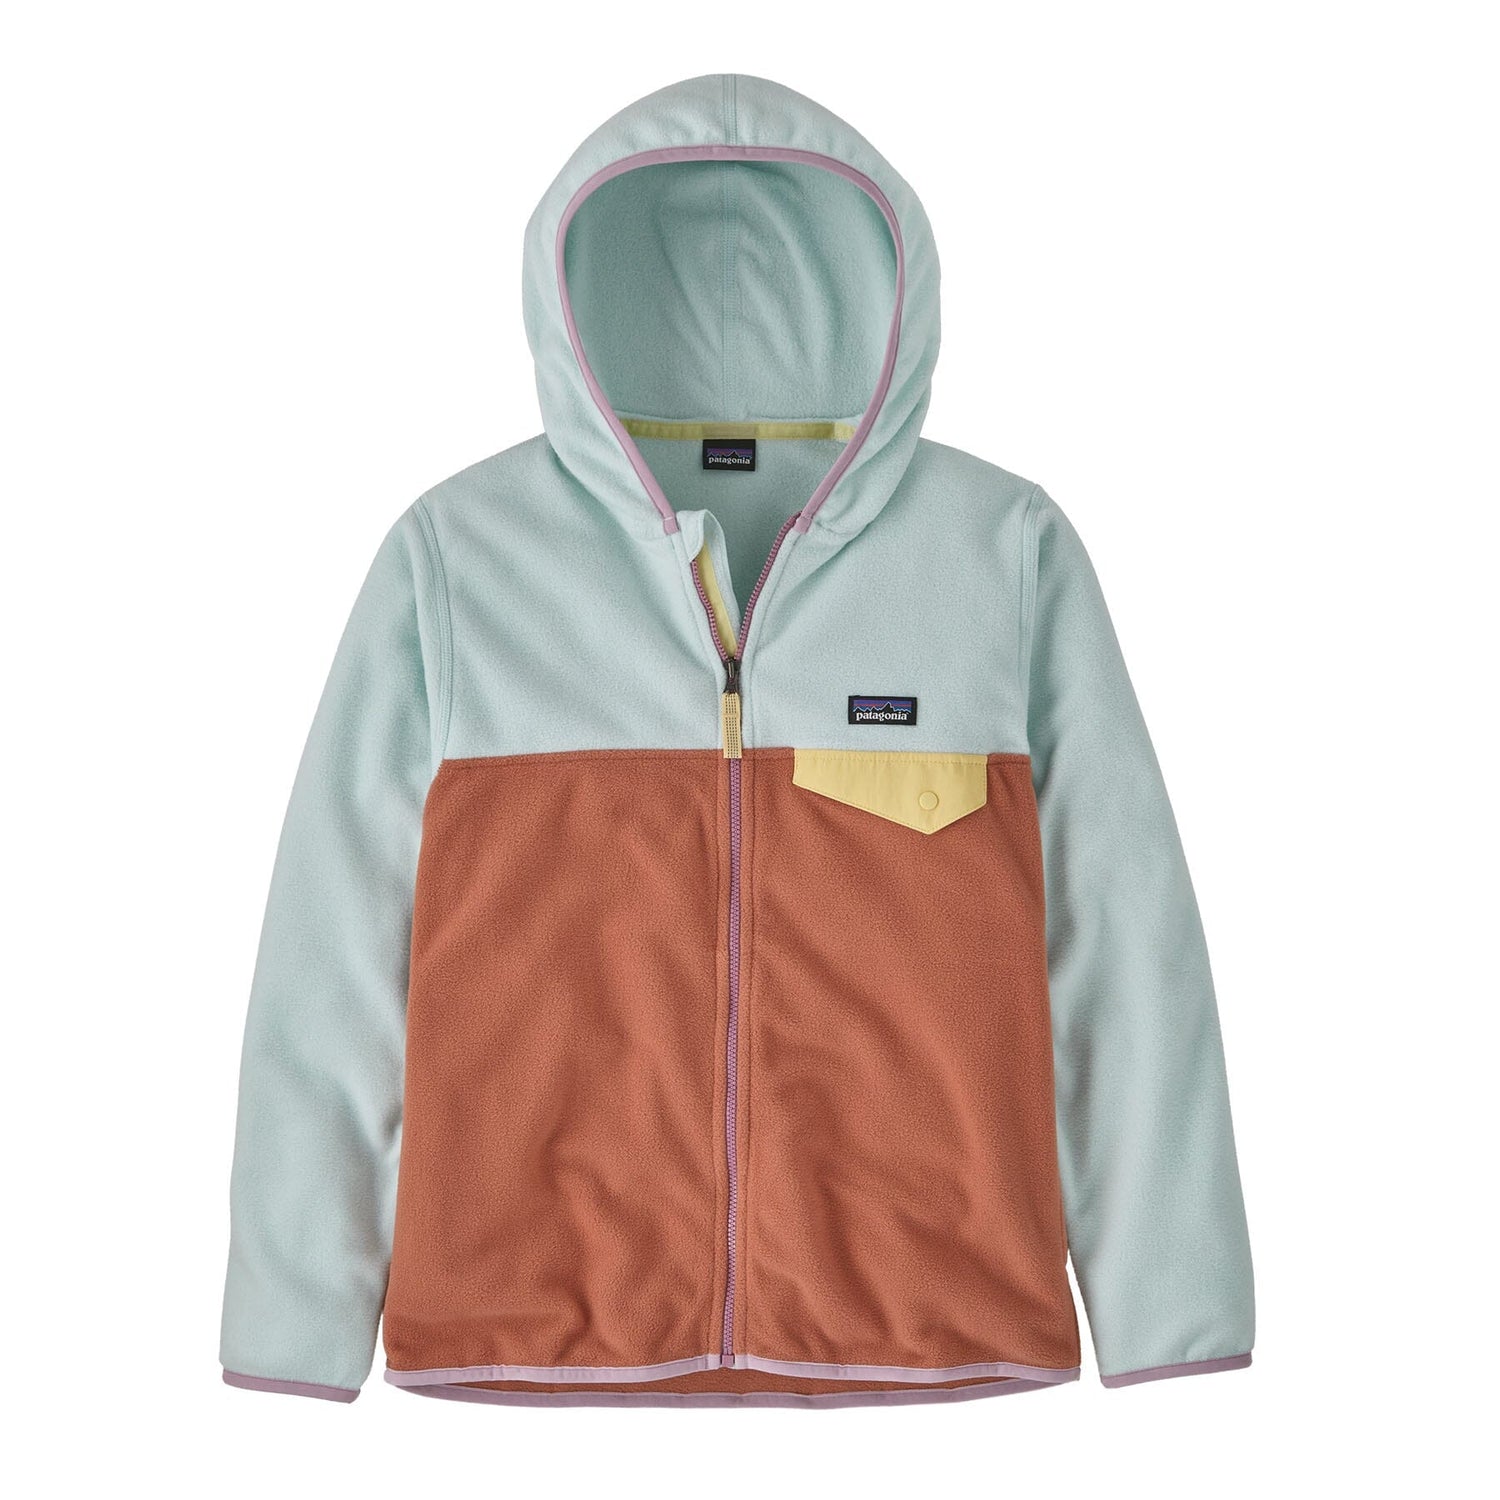 Patagonia Kids Micro D Snap-T Jacket - 100% recycled polyester Sienna Clay Jacket